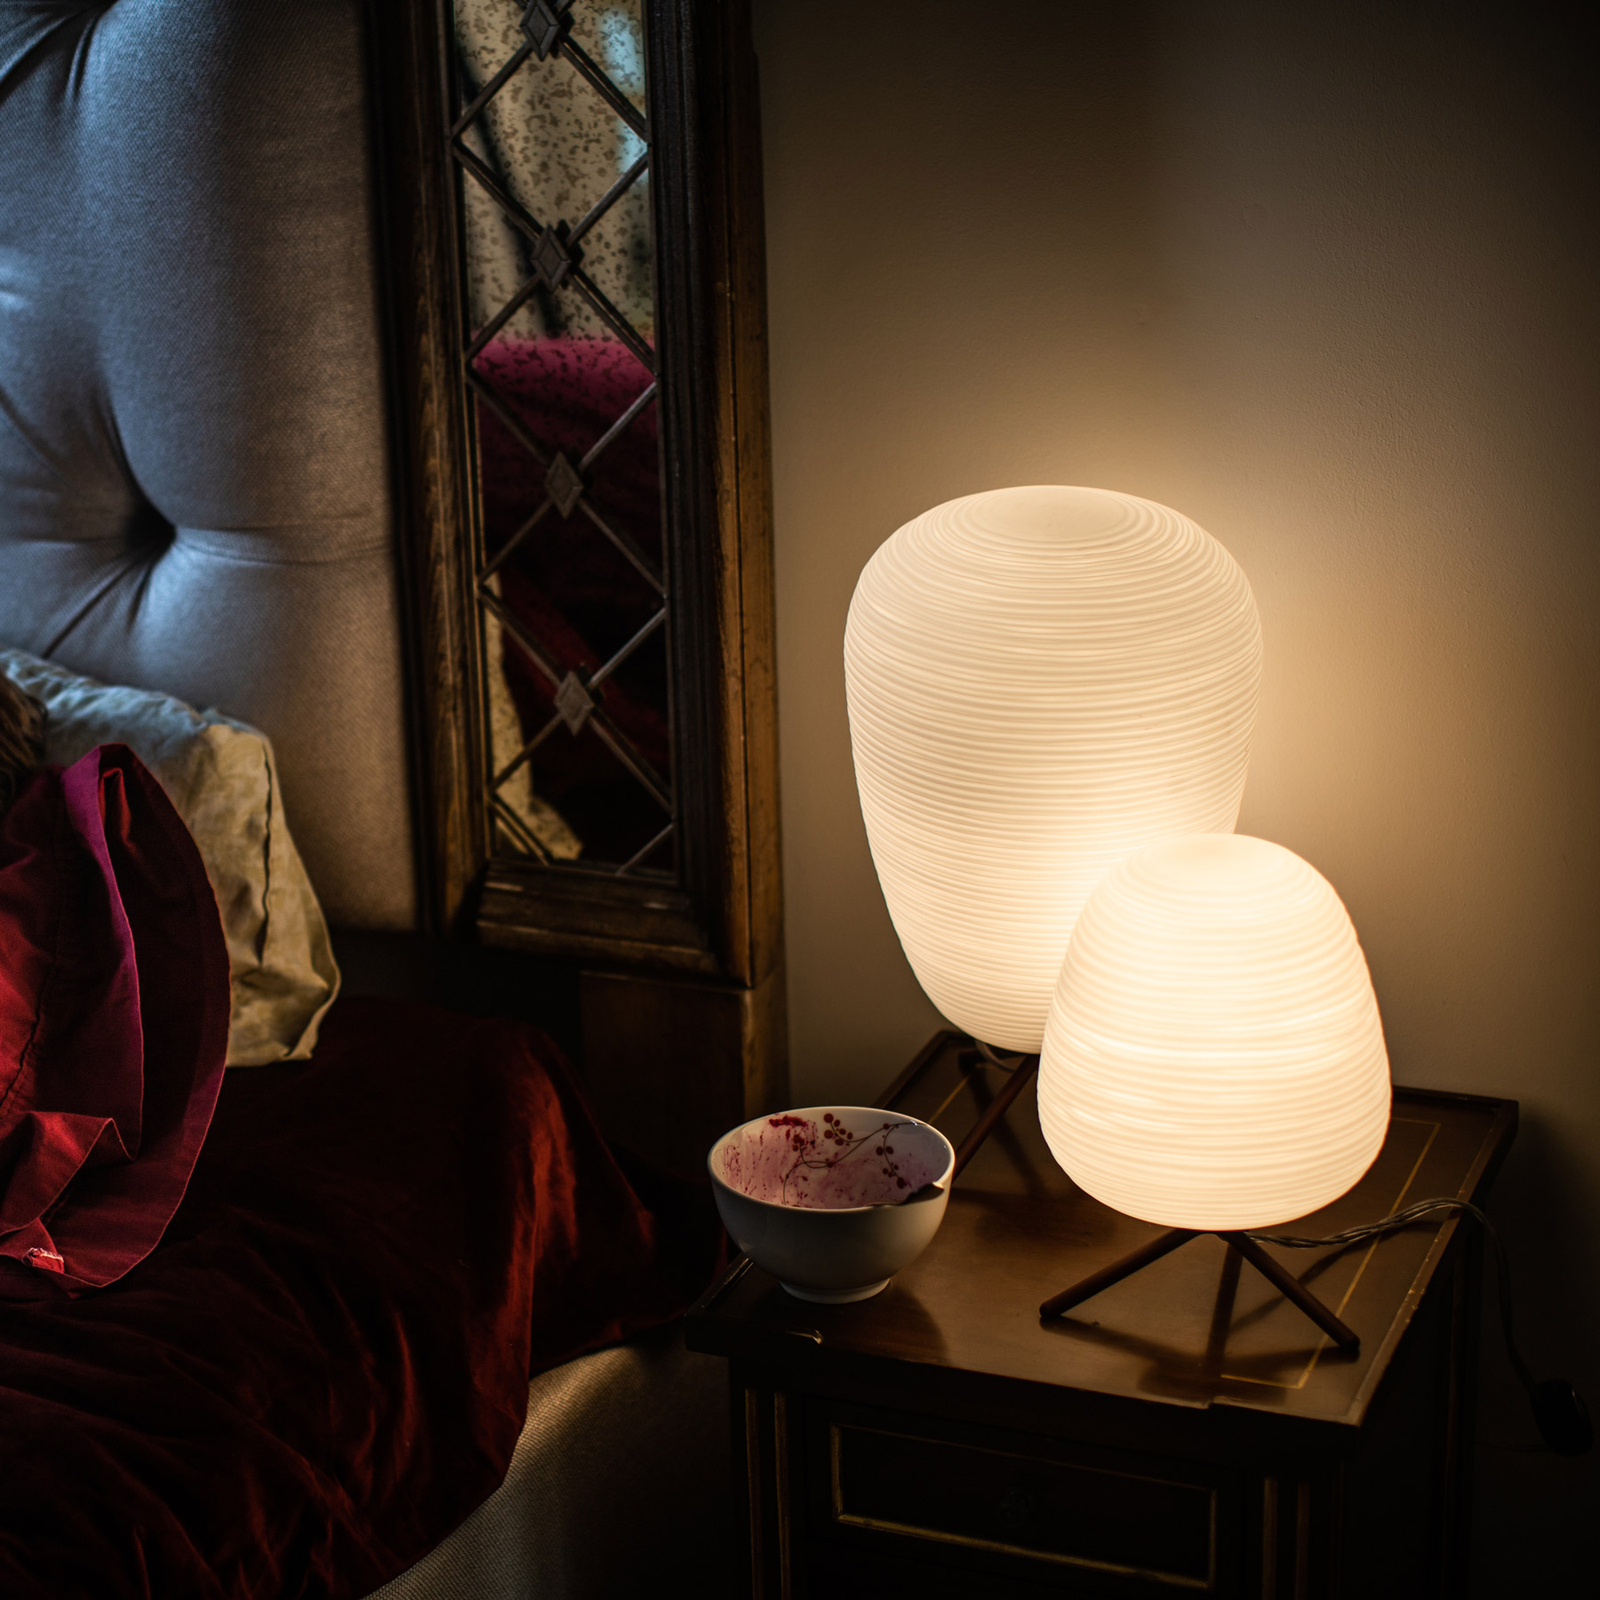 Foscarini Rituals 3 glass table lamp with dimmer